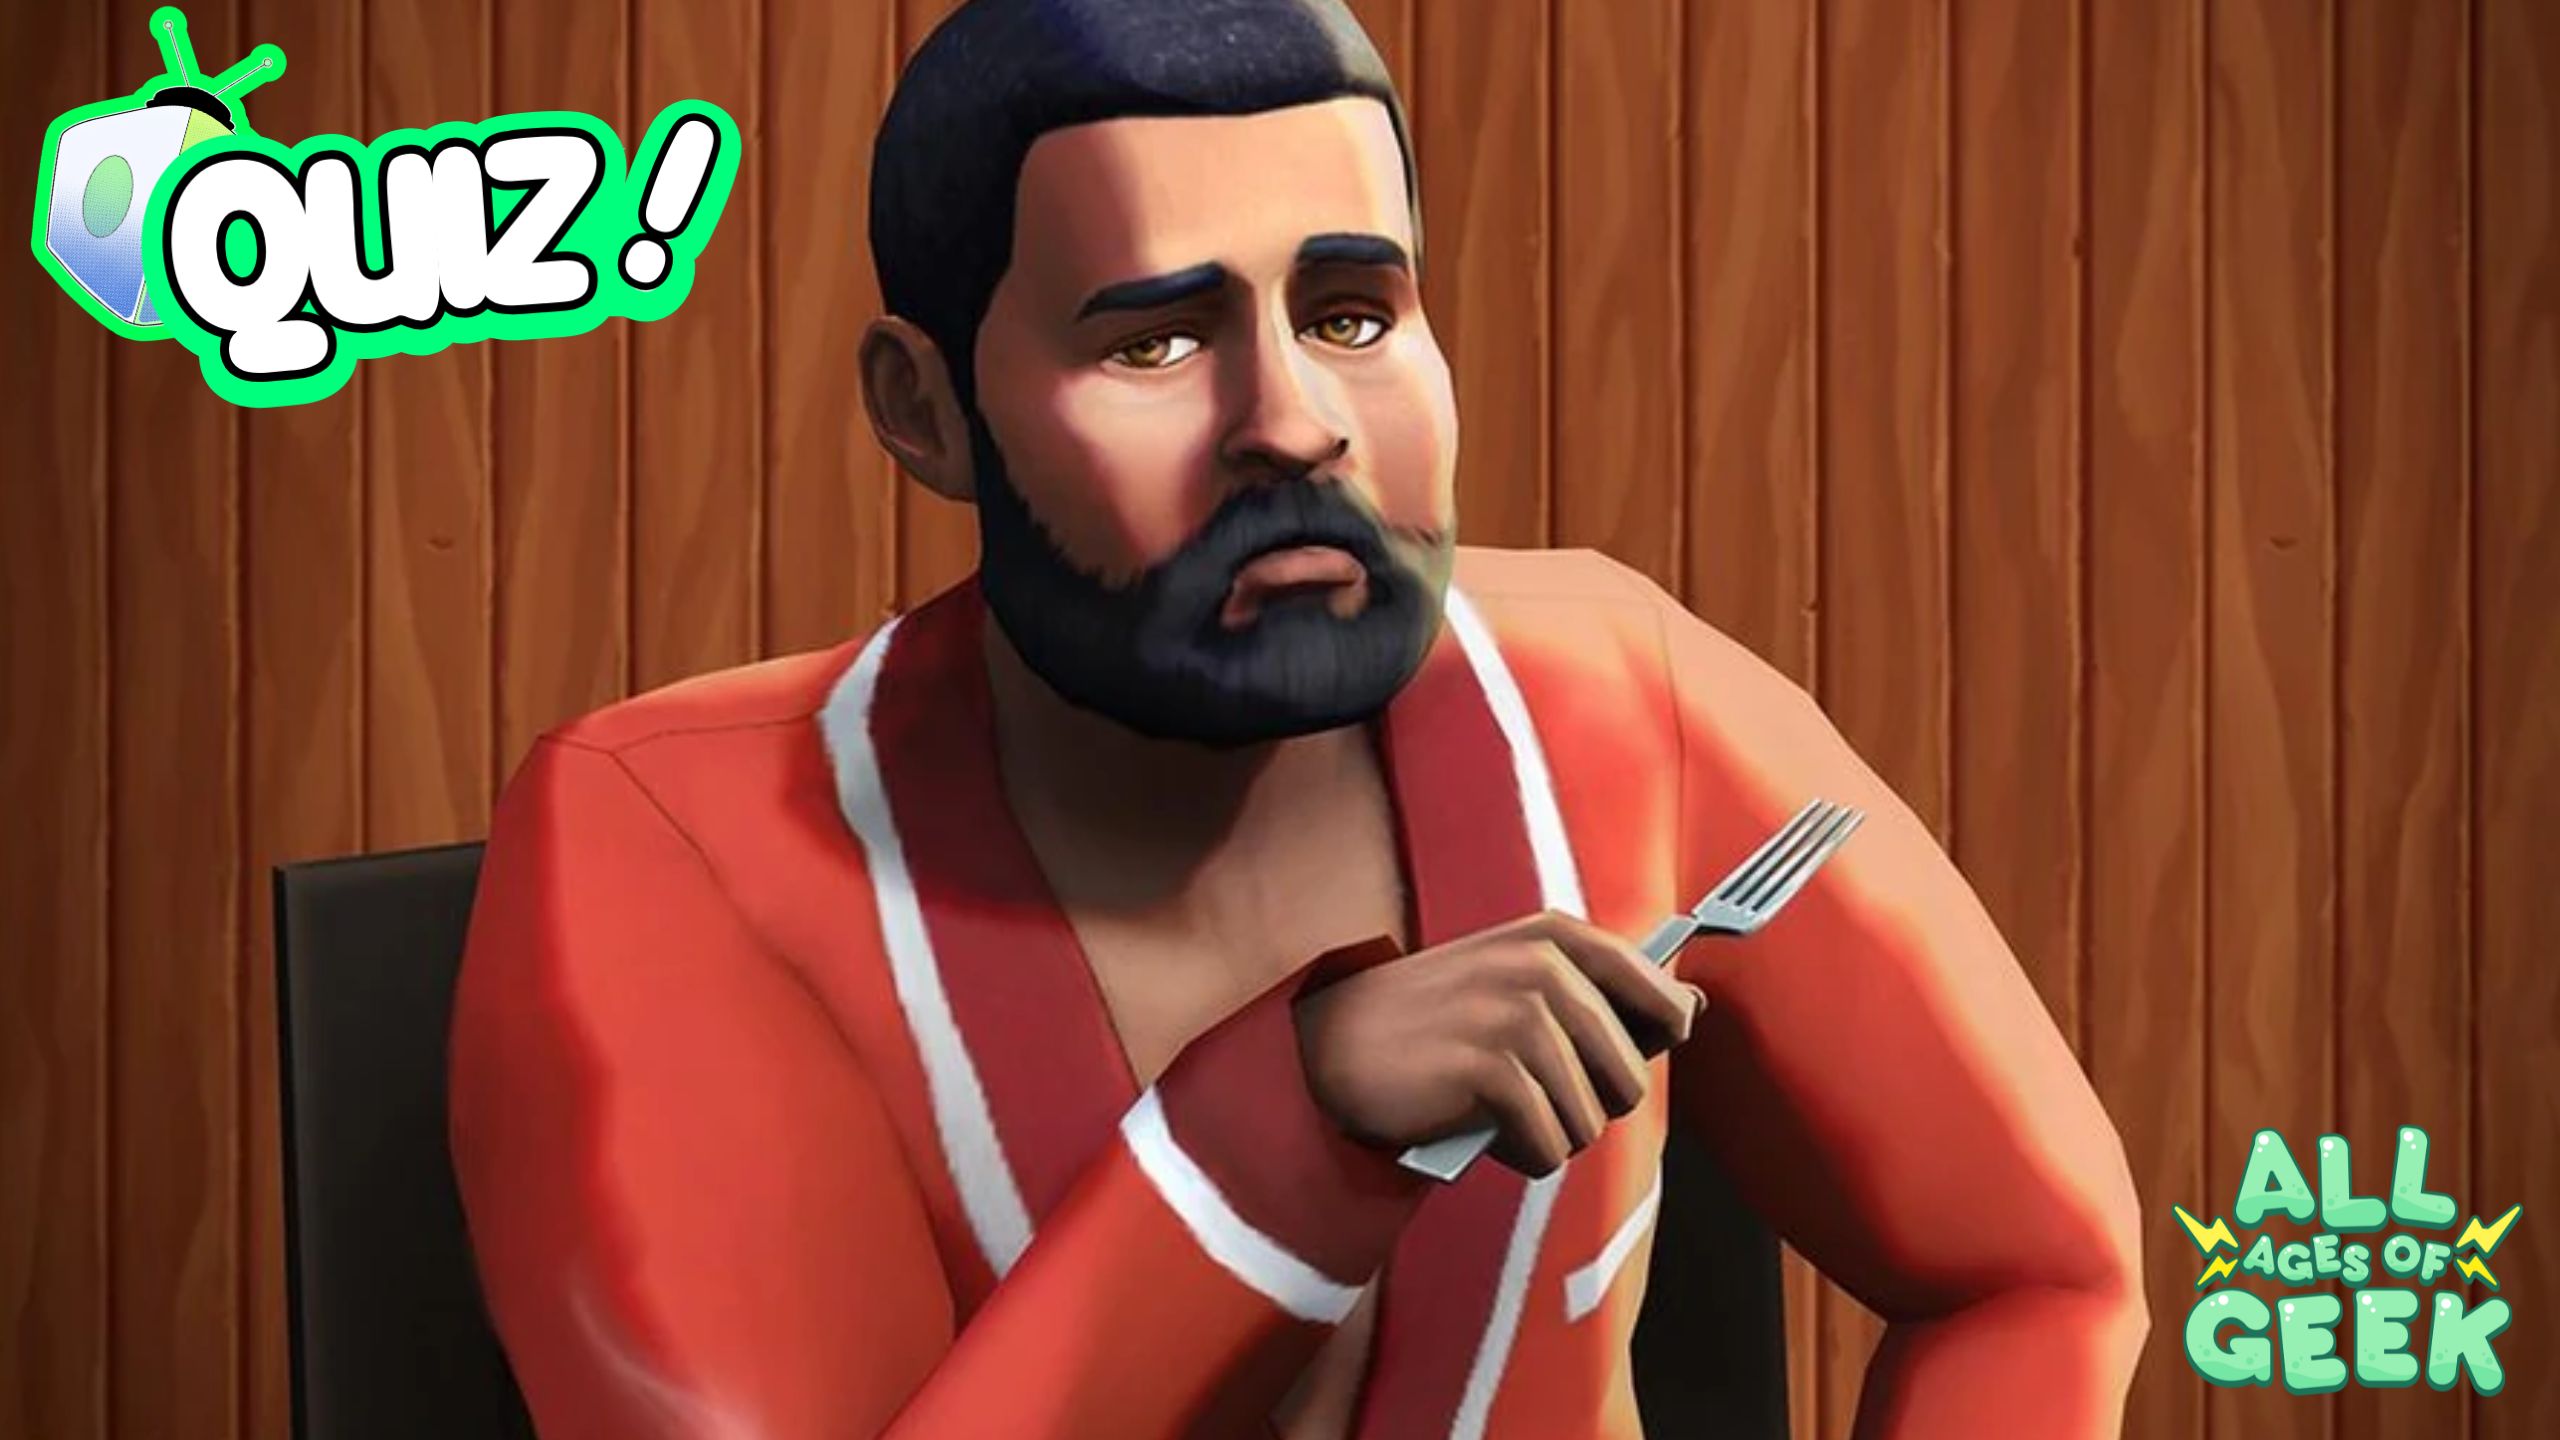 A character from a video game Sim 4 is seated at a table, holding a fork in their right hand. They have a full beard, neatly trimmed hair, and they're wearing a red jacket with white lining. The character appears to be in a dining setting, with a wooden panel backdrop. A graphic overlay reads "QUIZ!" in green letters, and there's also the logo of "All Ages of Geek" in the bottom right corner, suggesting this image may be related to some sort of interactive quiz